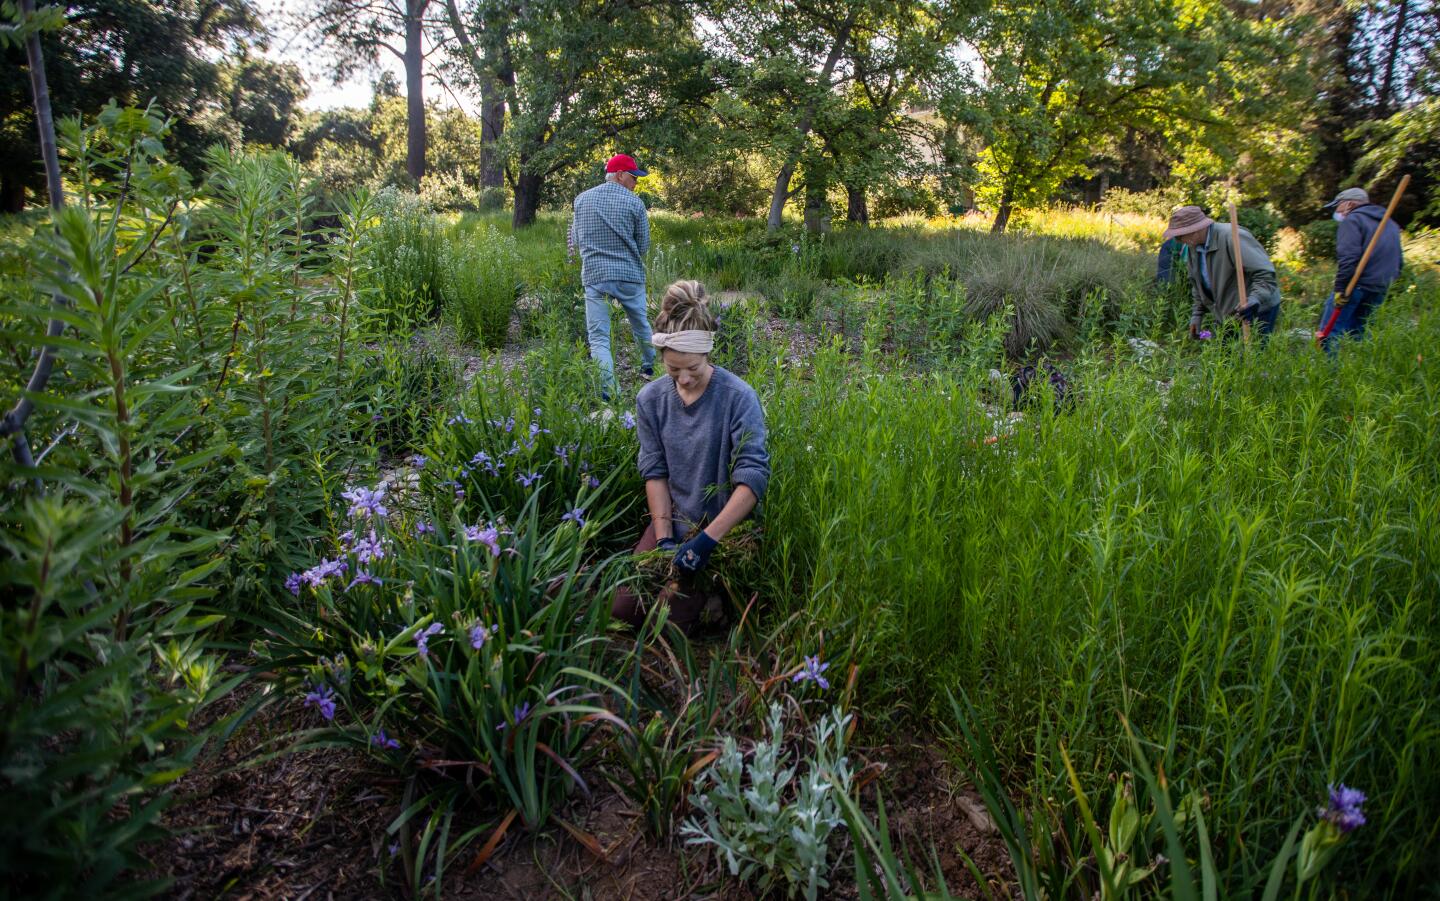 Horticulturist Laura Christianson, middle, works at the California Botanic Garden in Claremont.